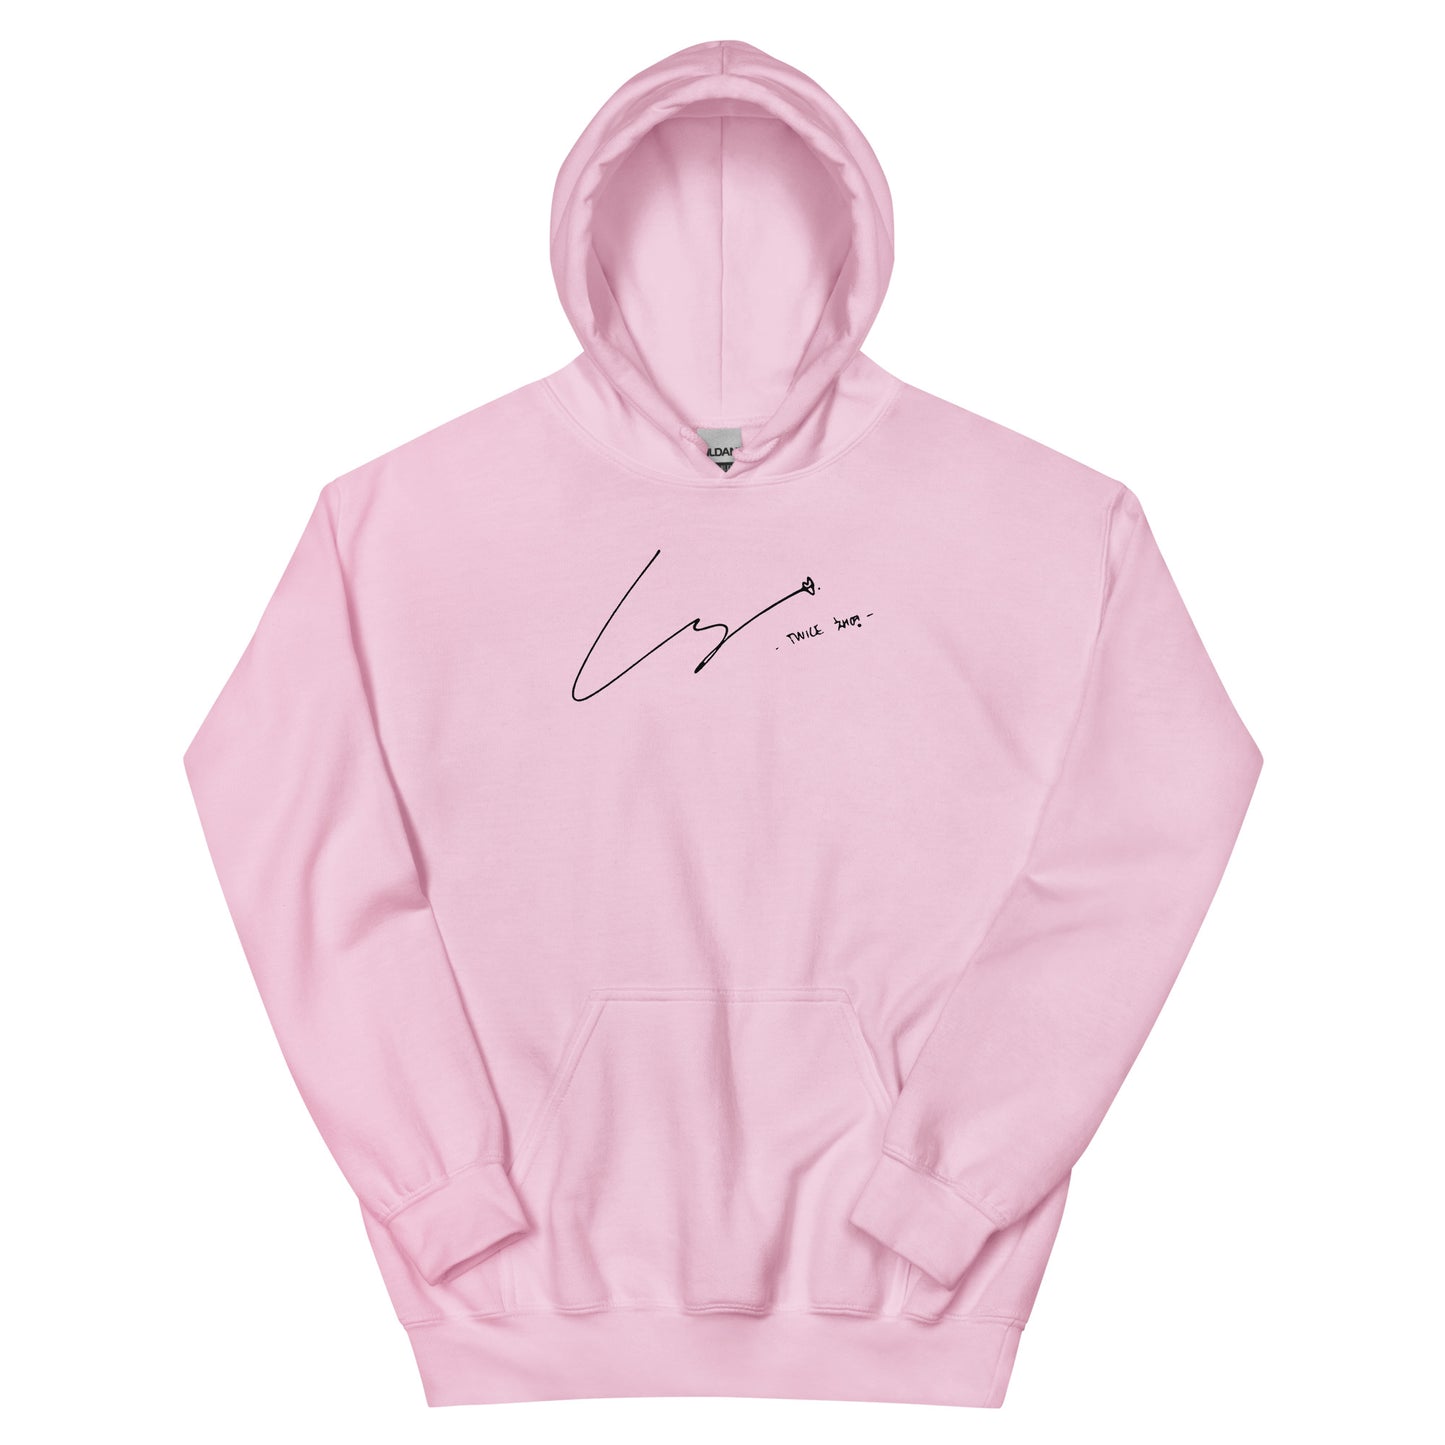 TWICE Chaeyoung, Son Chae-young Signature Unisex Hoodie